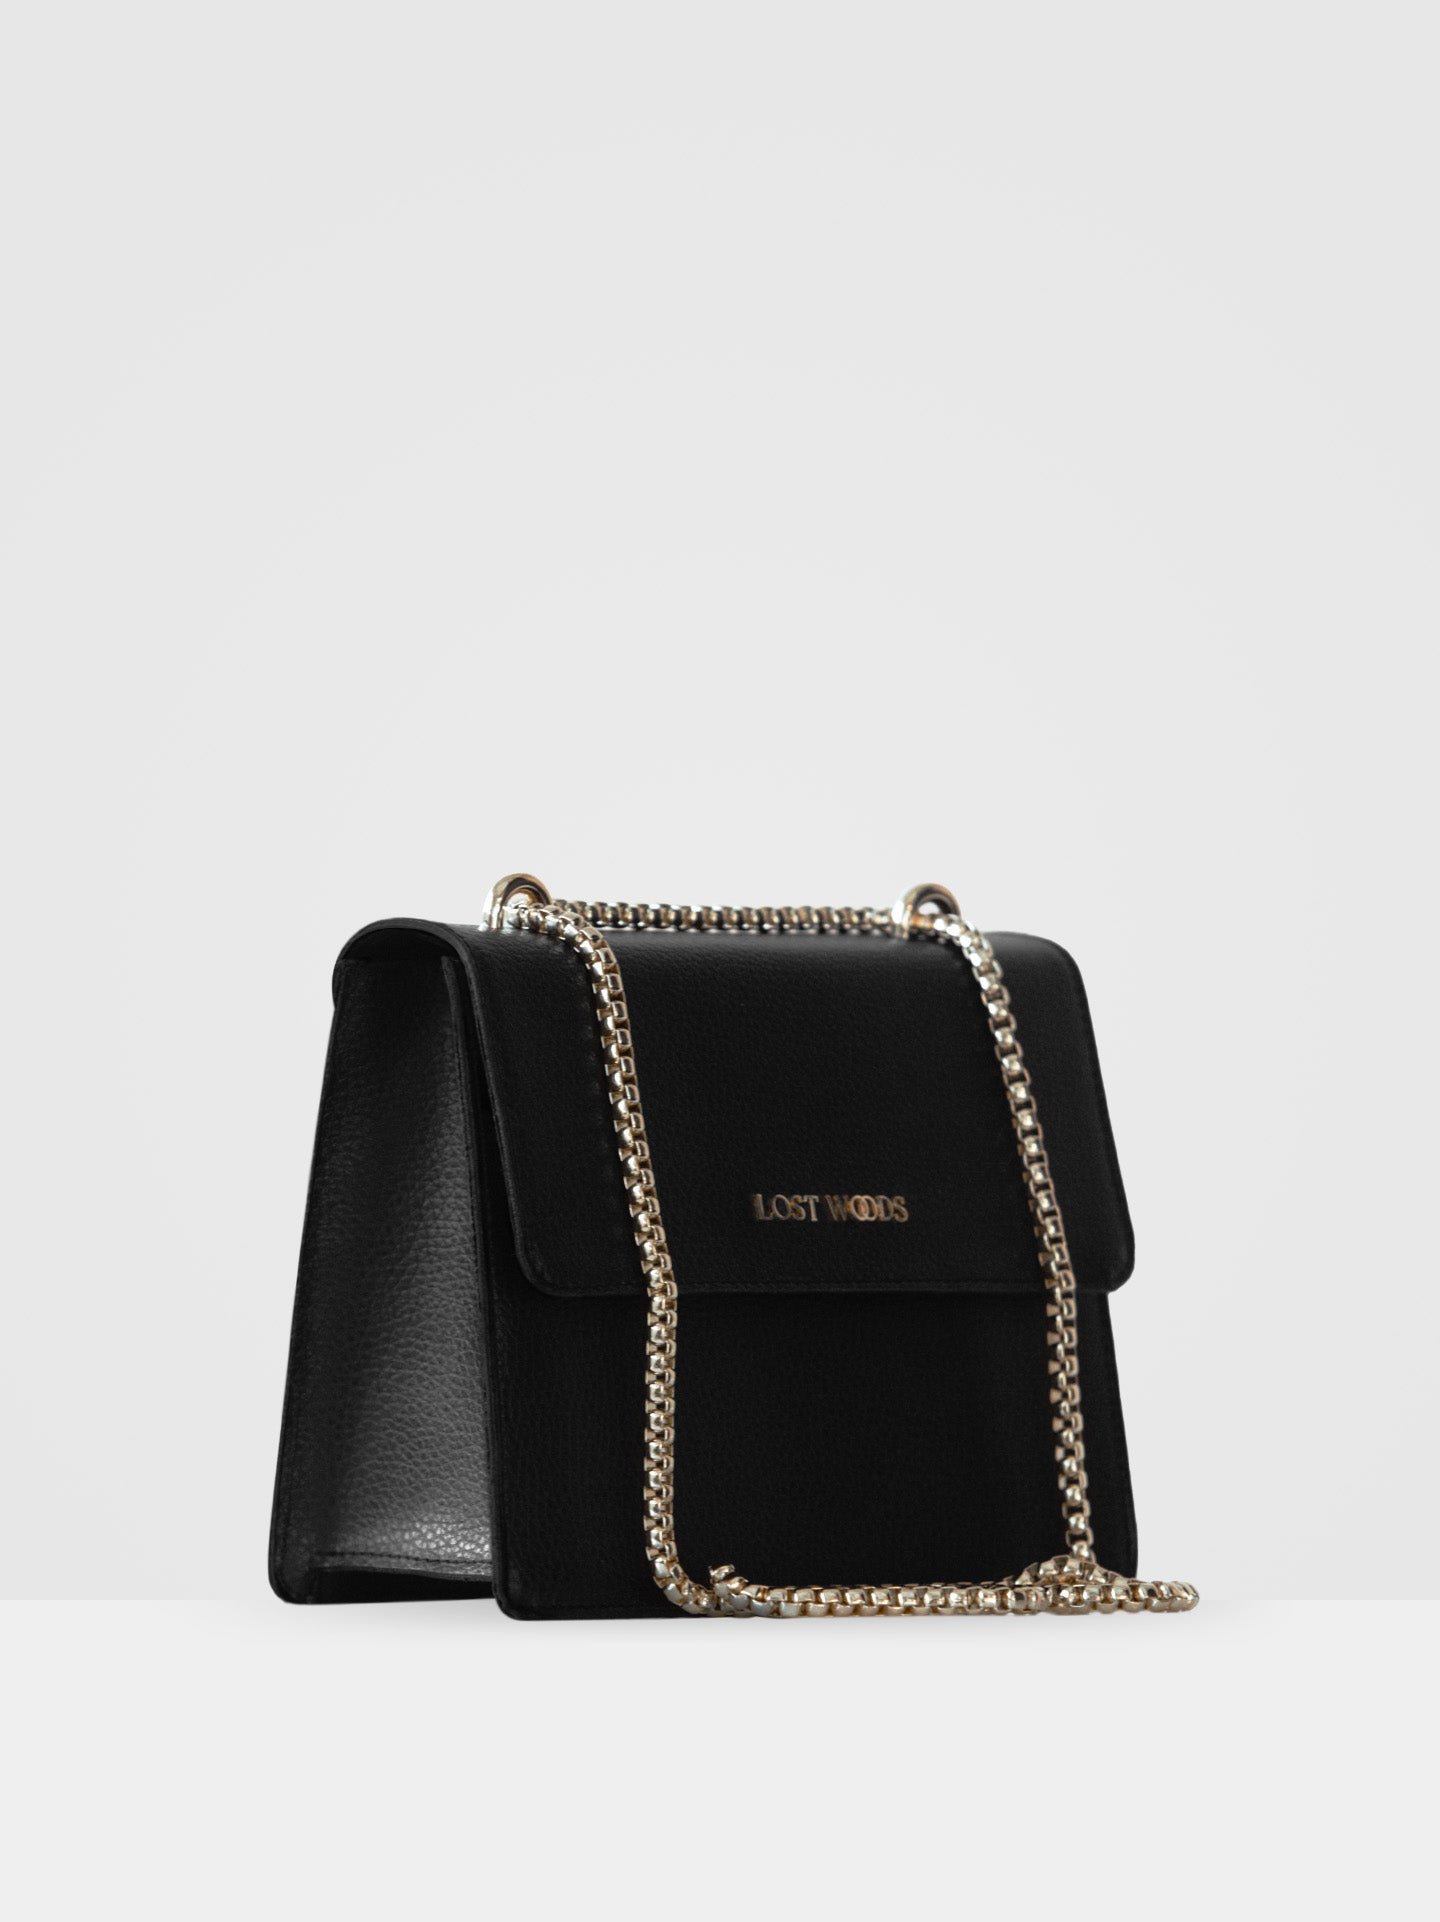 Willow Chain Bag in Black & Gold